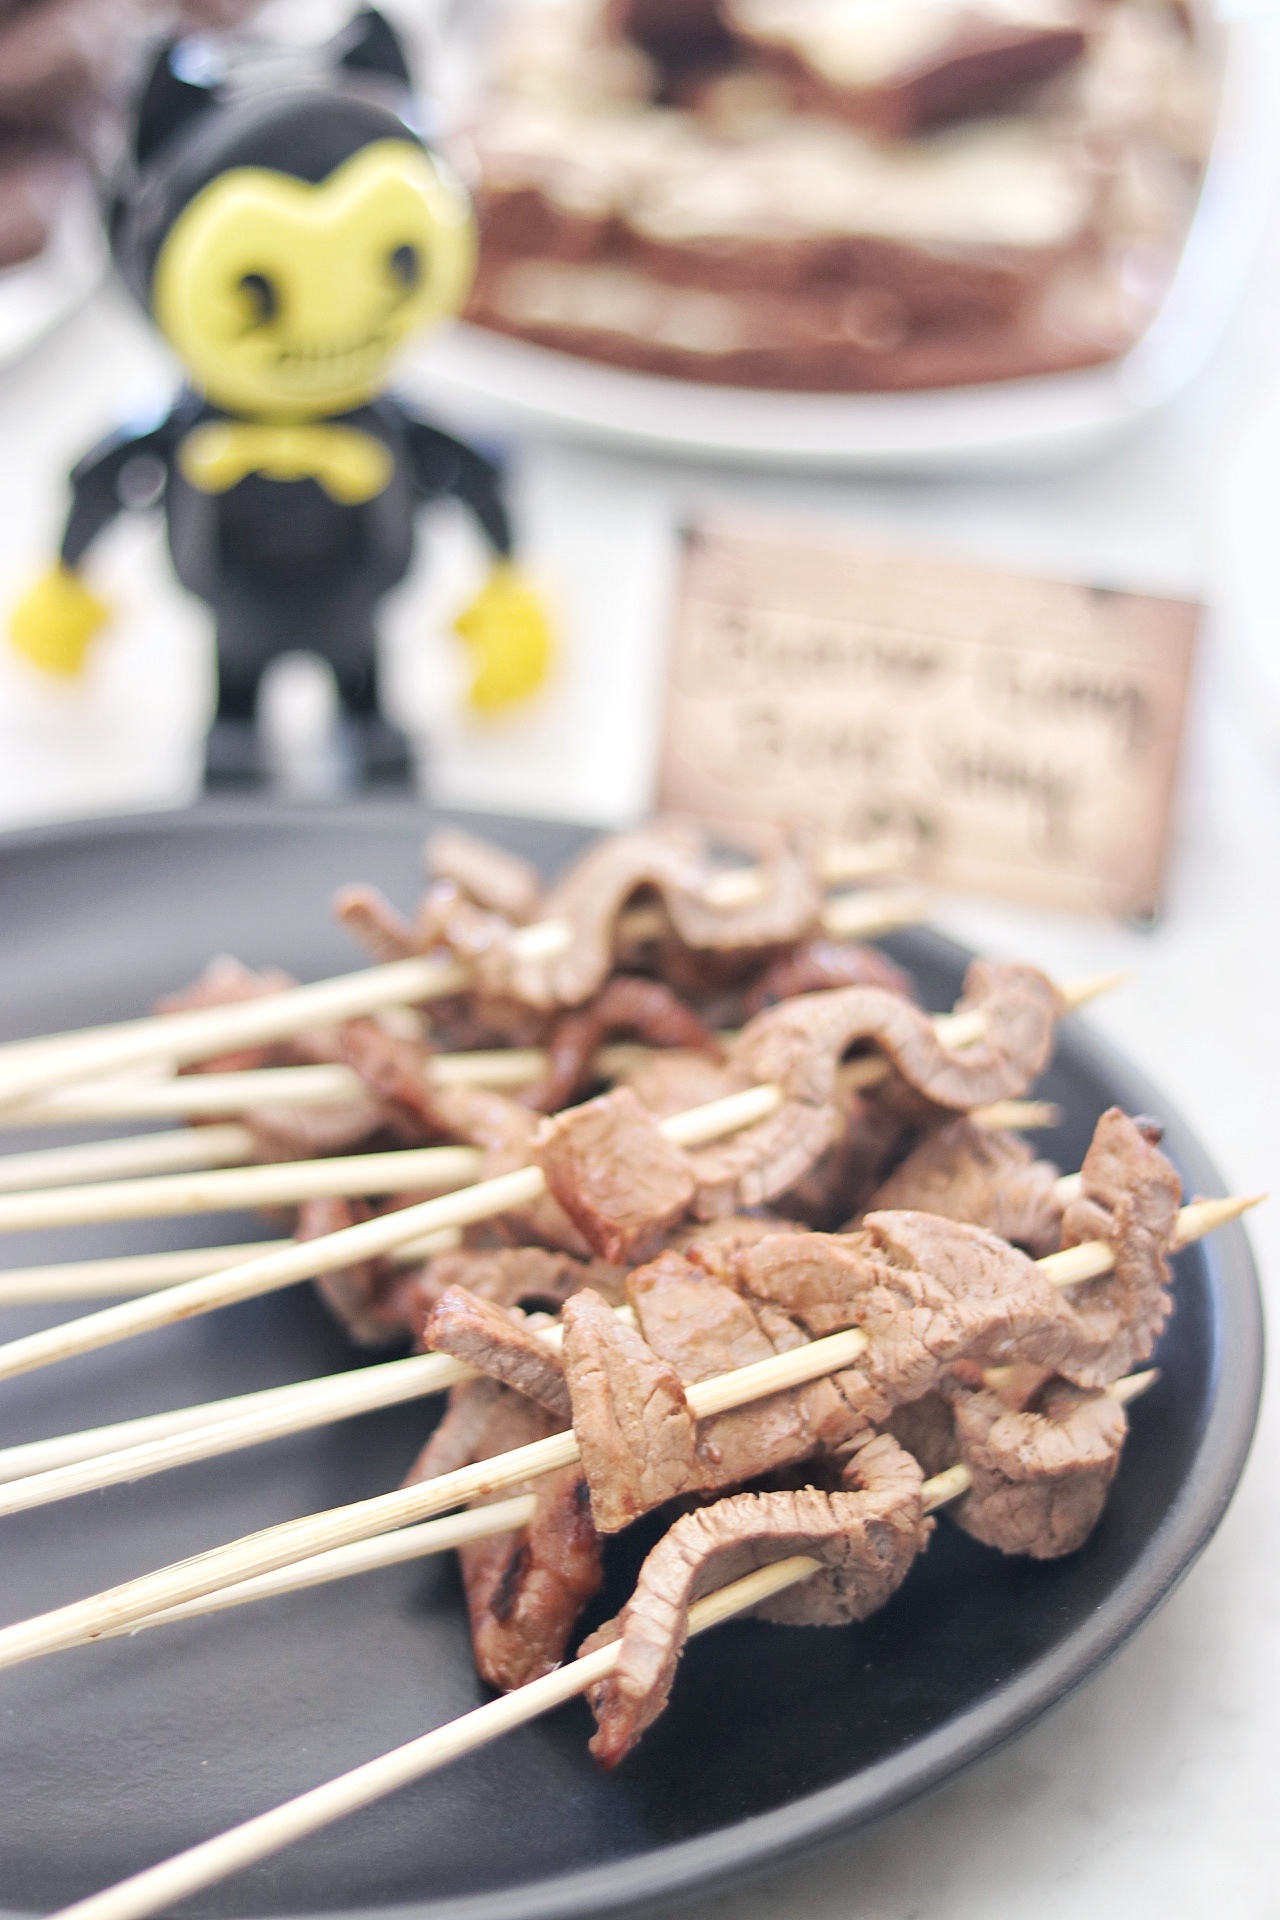 Food ideas for a Bendy and the Ink Machine themed birthday party: Butcher Gang beef satay skewers 